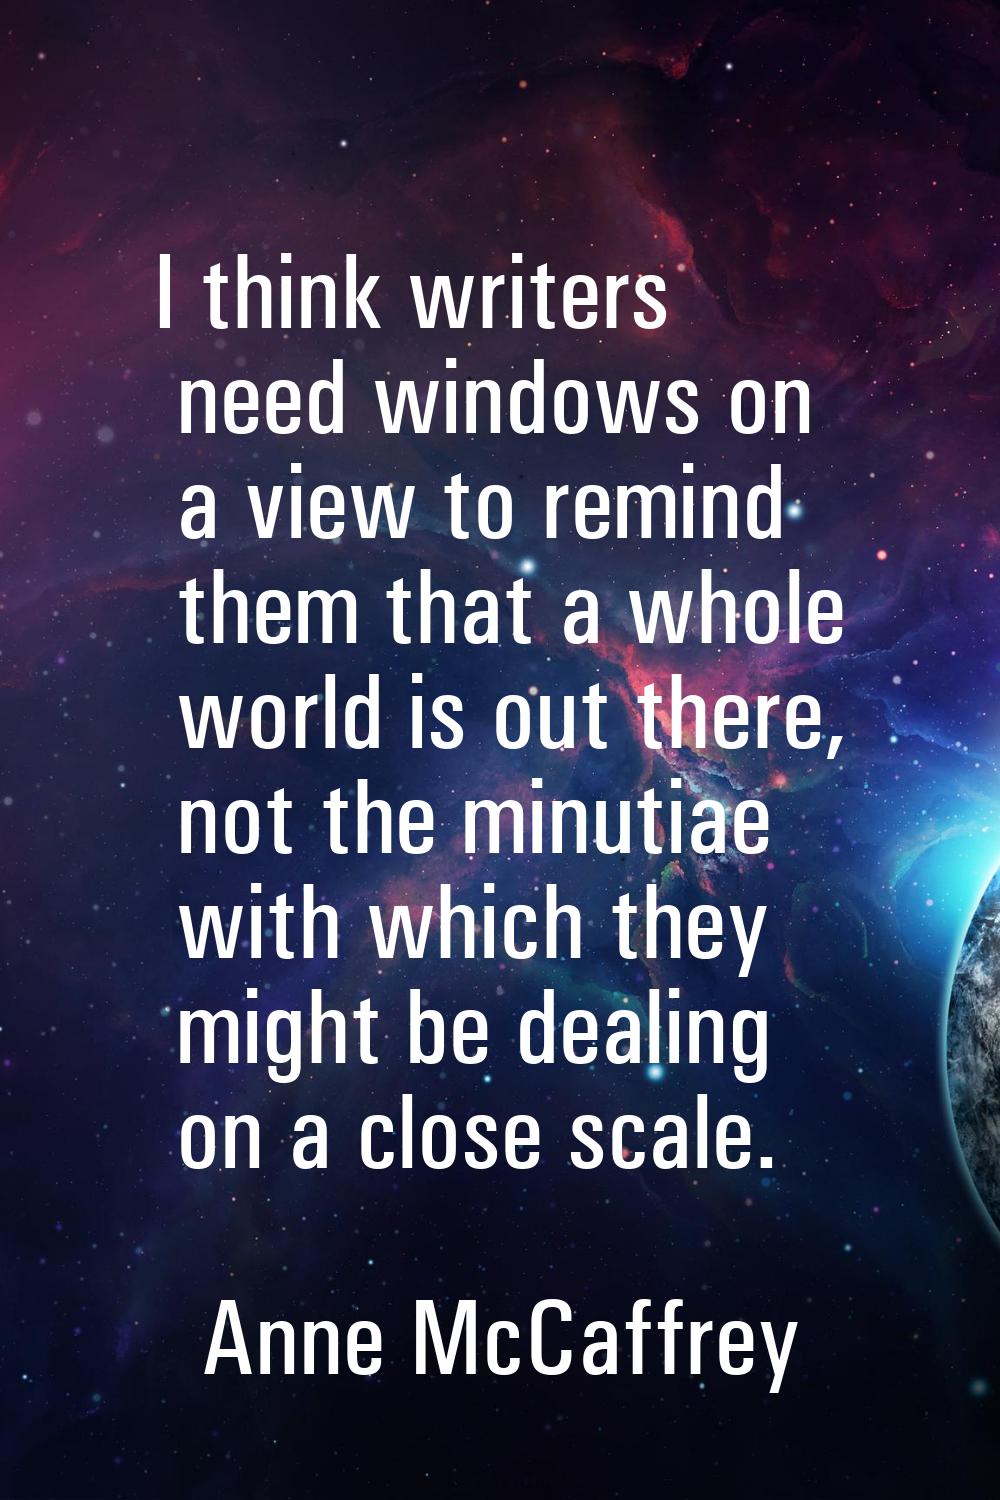 I think writers need windows on a view to remind them that a whole world is out there, not the minu